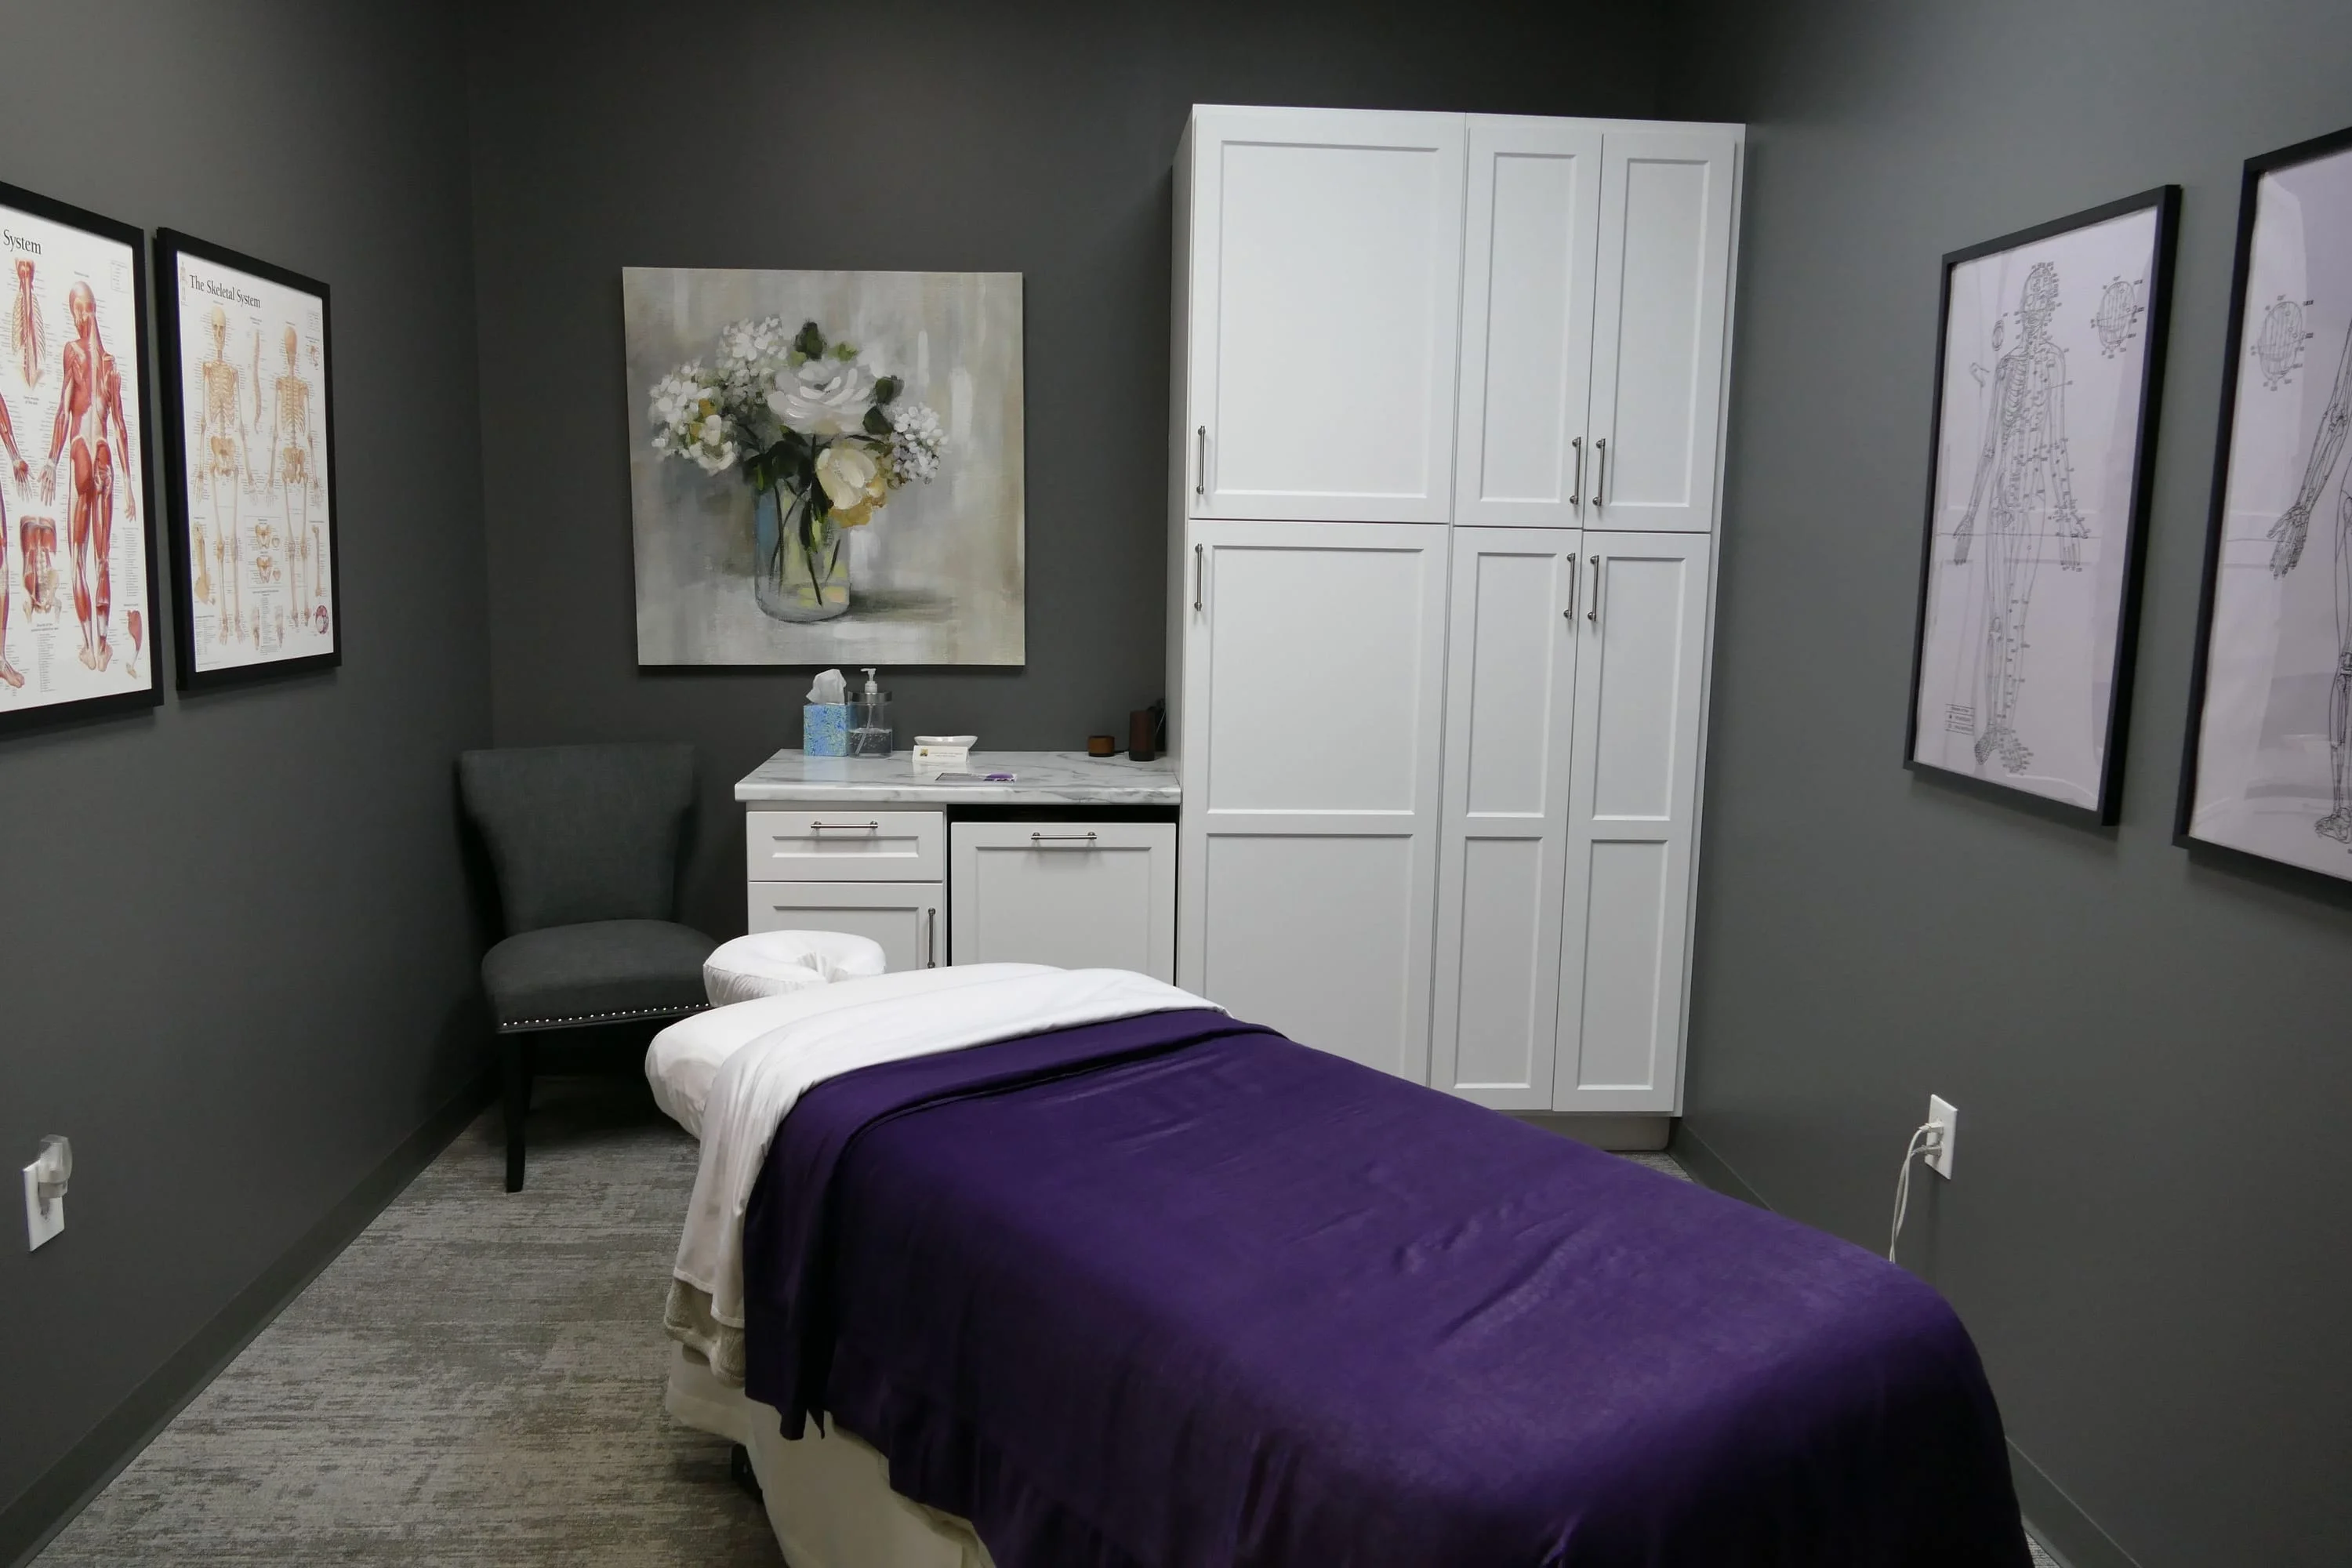 Massage and Acupuncture Rooms